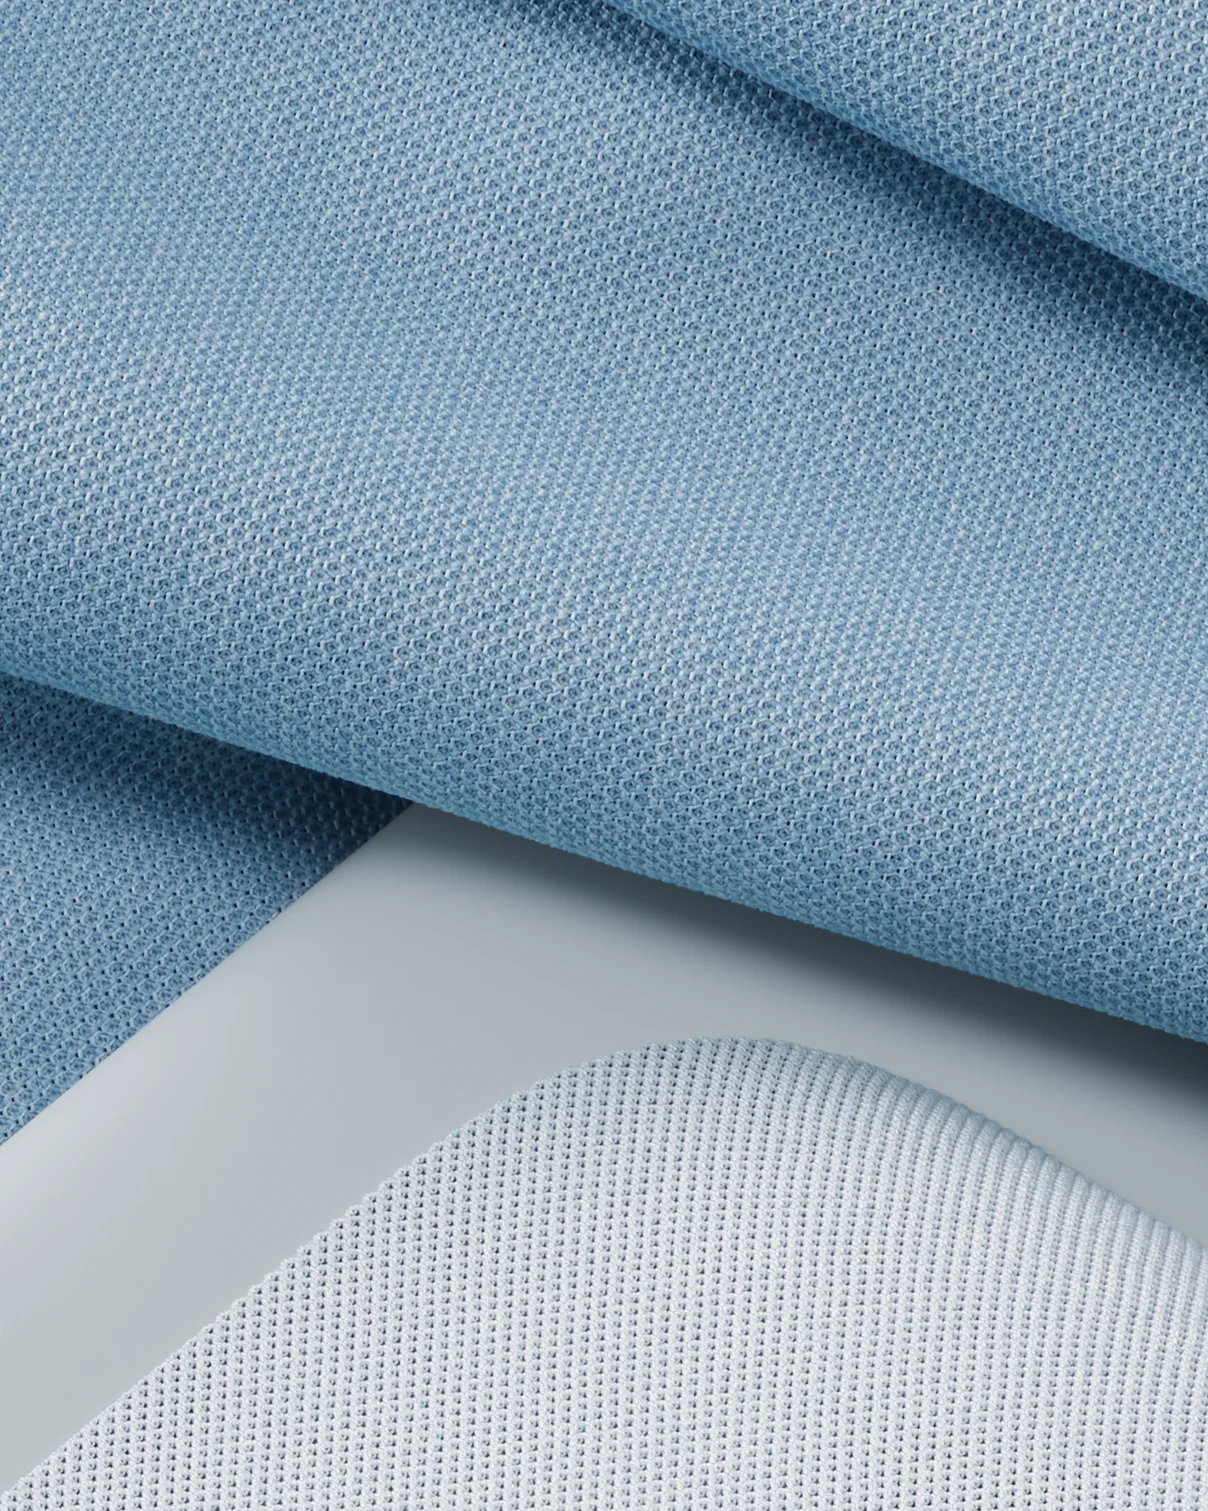 A close up of the fabric used on the Nest Hub in Mist.